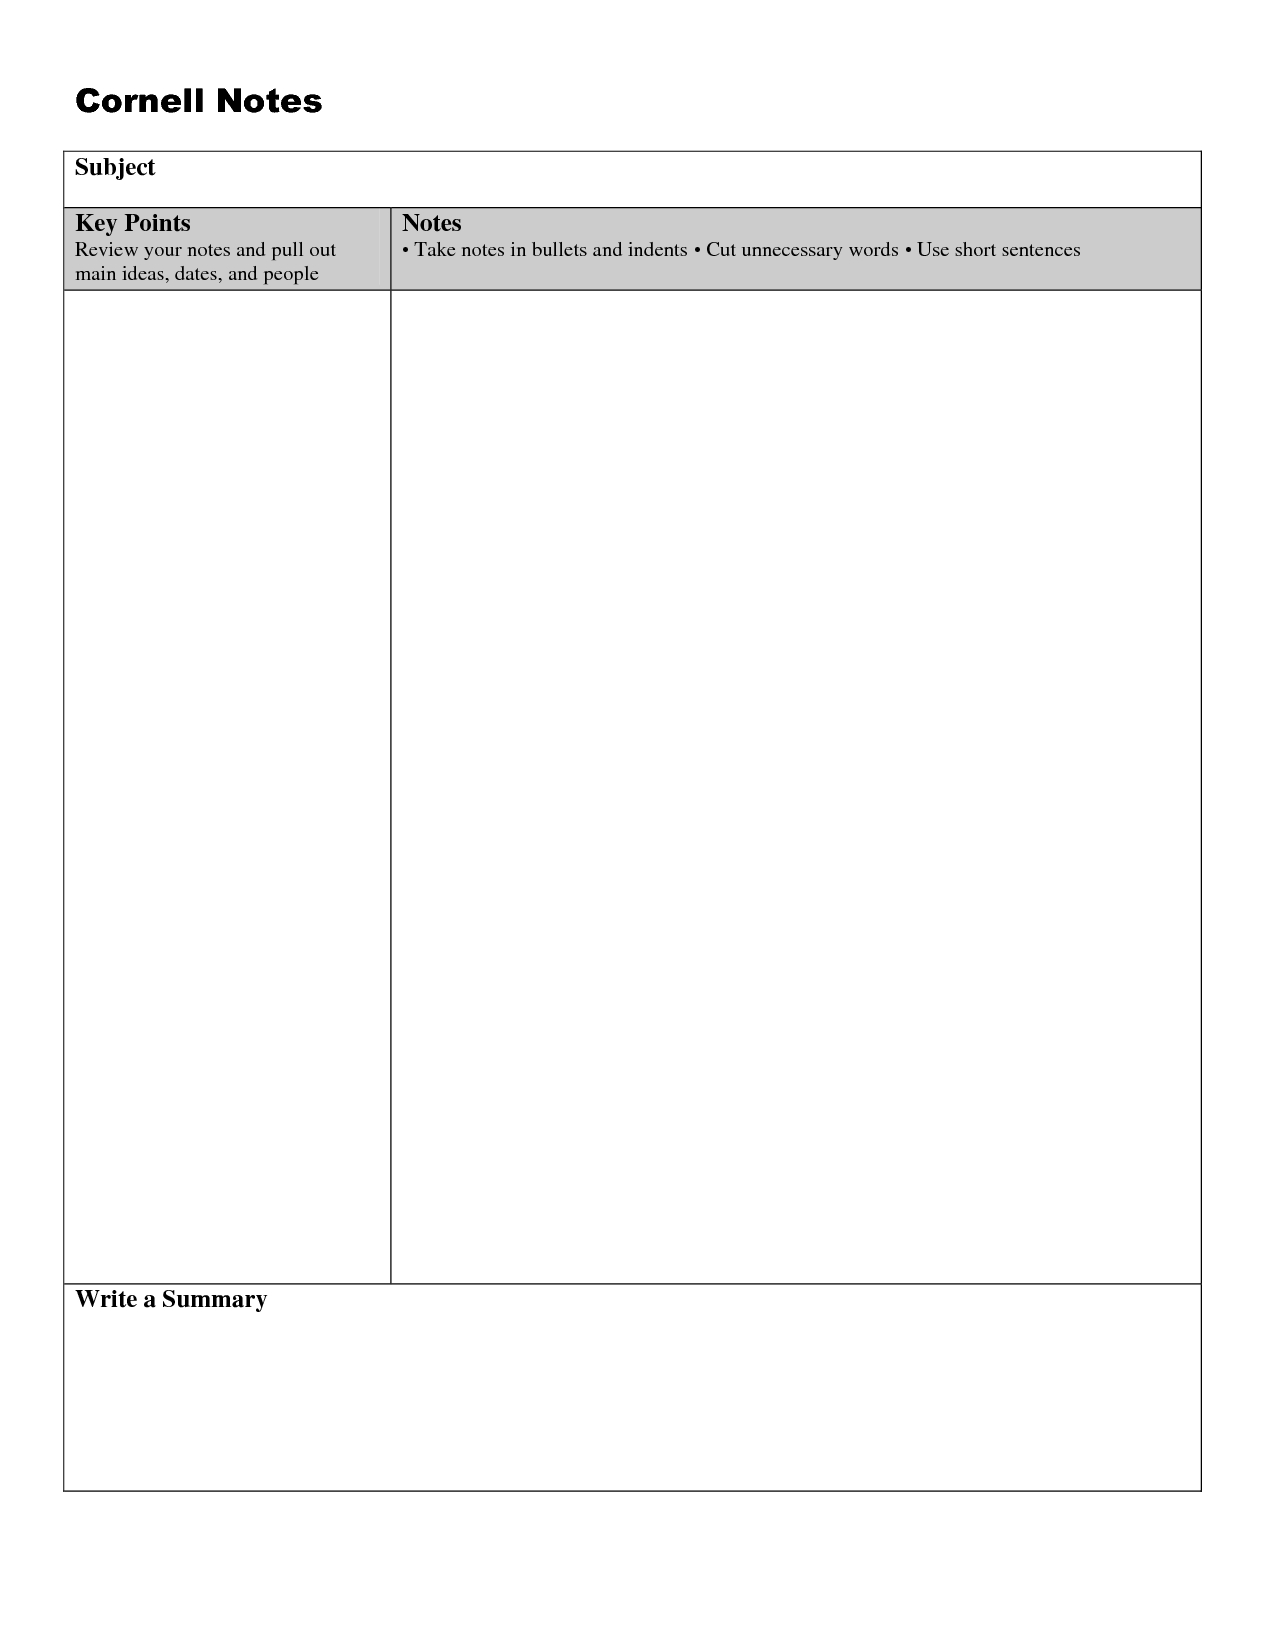 005 Note Taking Template Word Ideas Unforgettable Cornell Throughout Note Taking Template Word